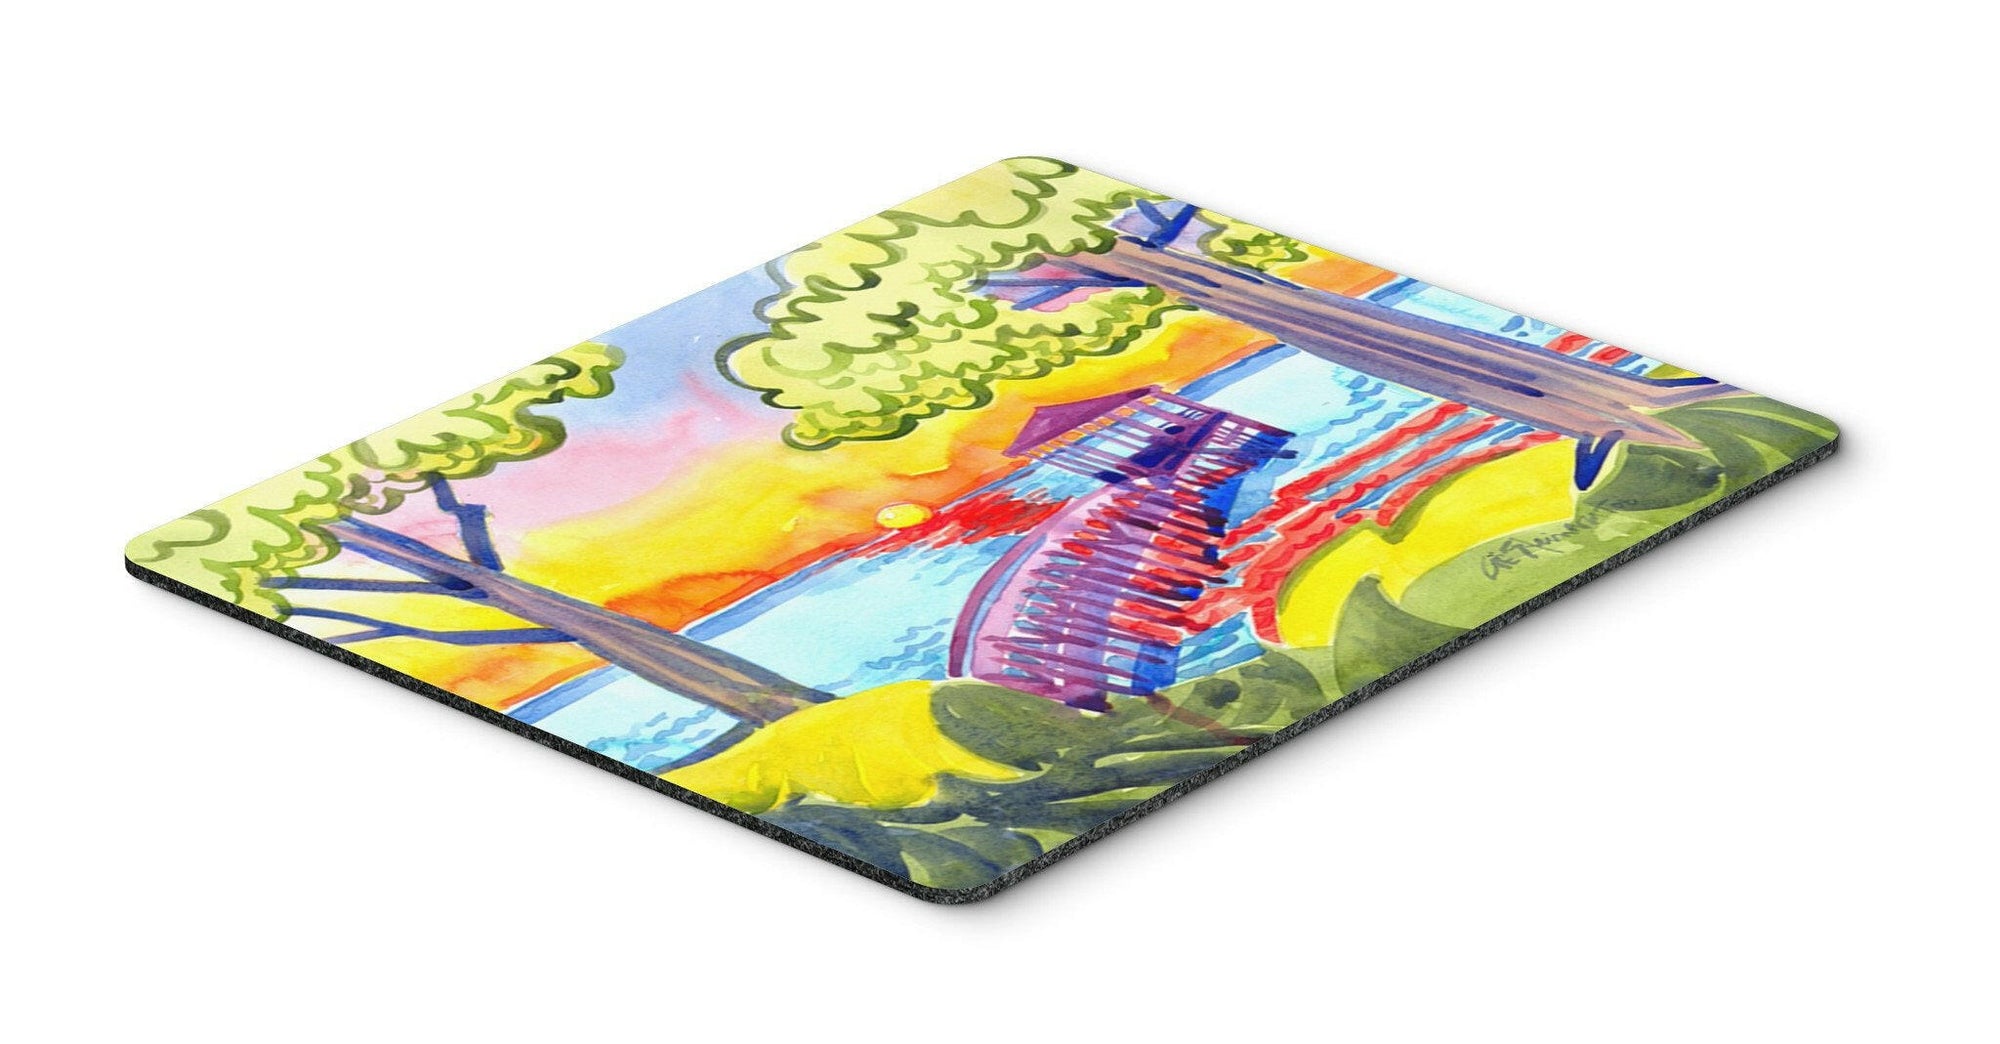 Dock at the pier Mouse pad, hot pad, or trivet by Caroline's Treasures